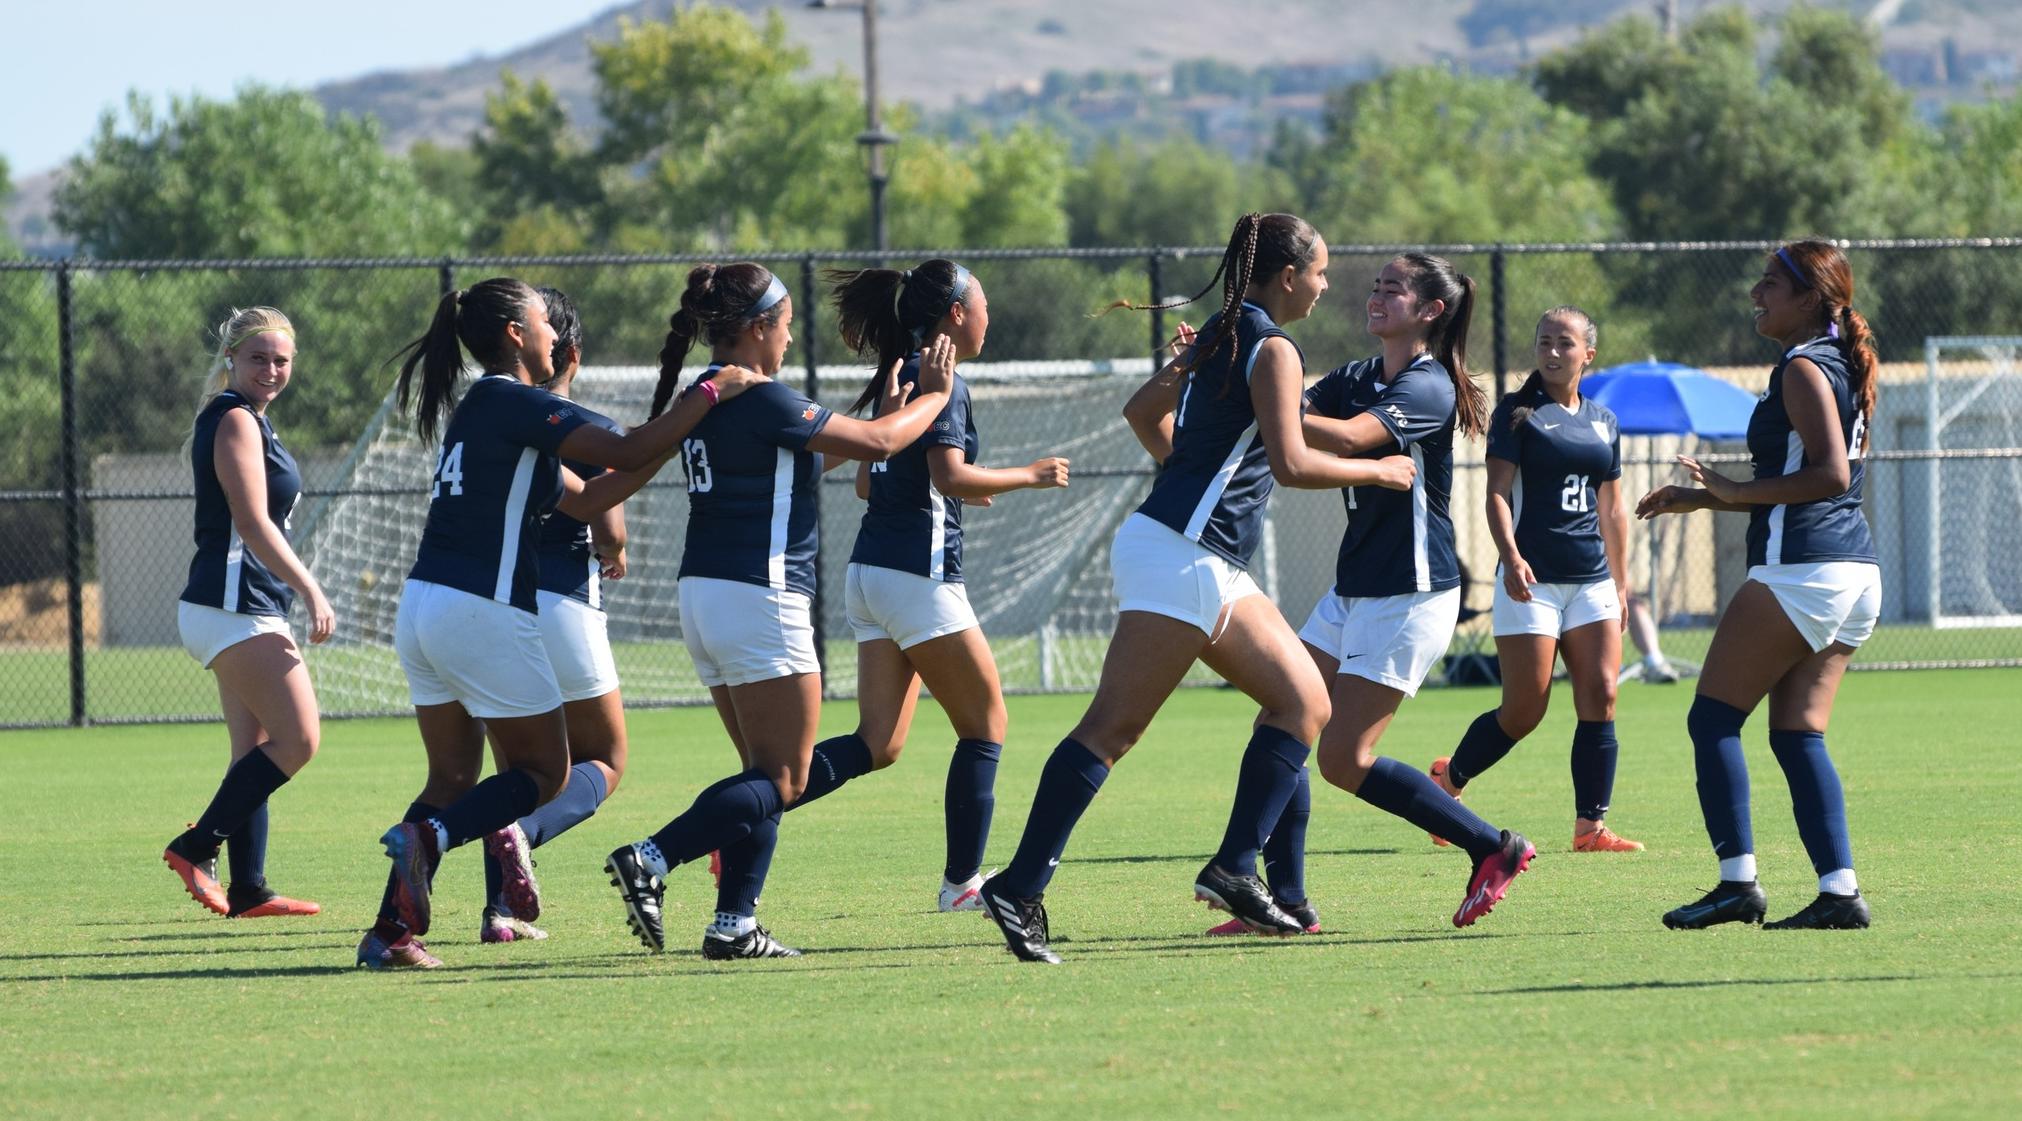 Women's soccer team falls to MiraCosta, 4-2, at home Friday